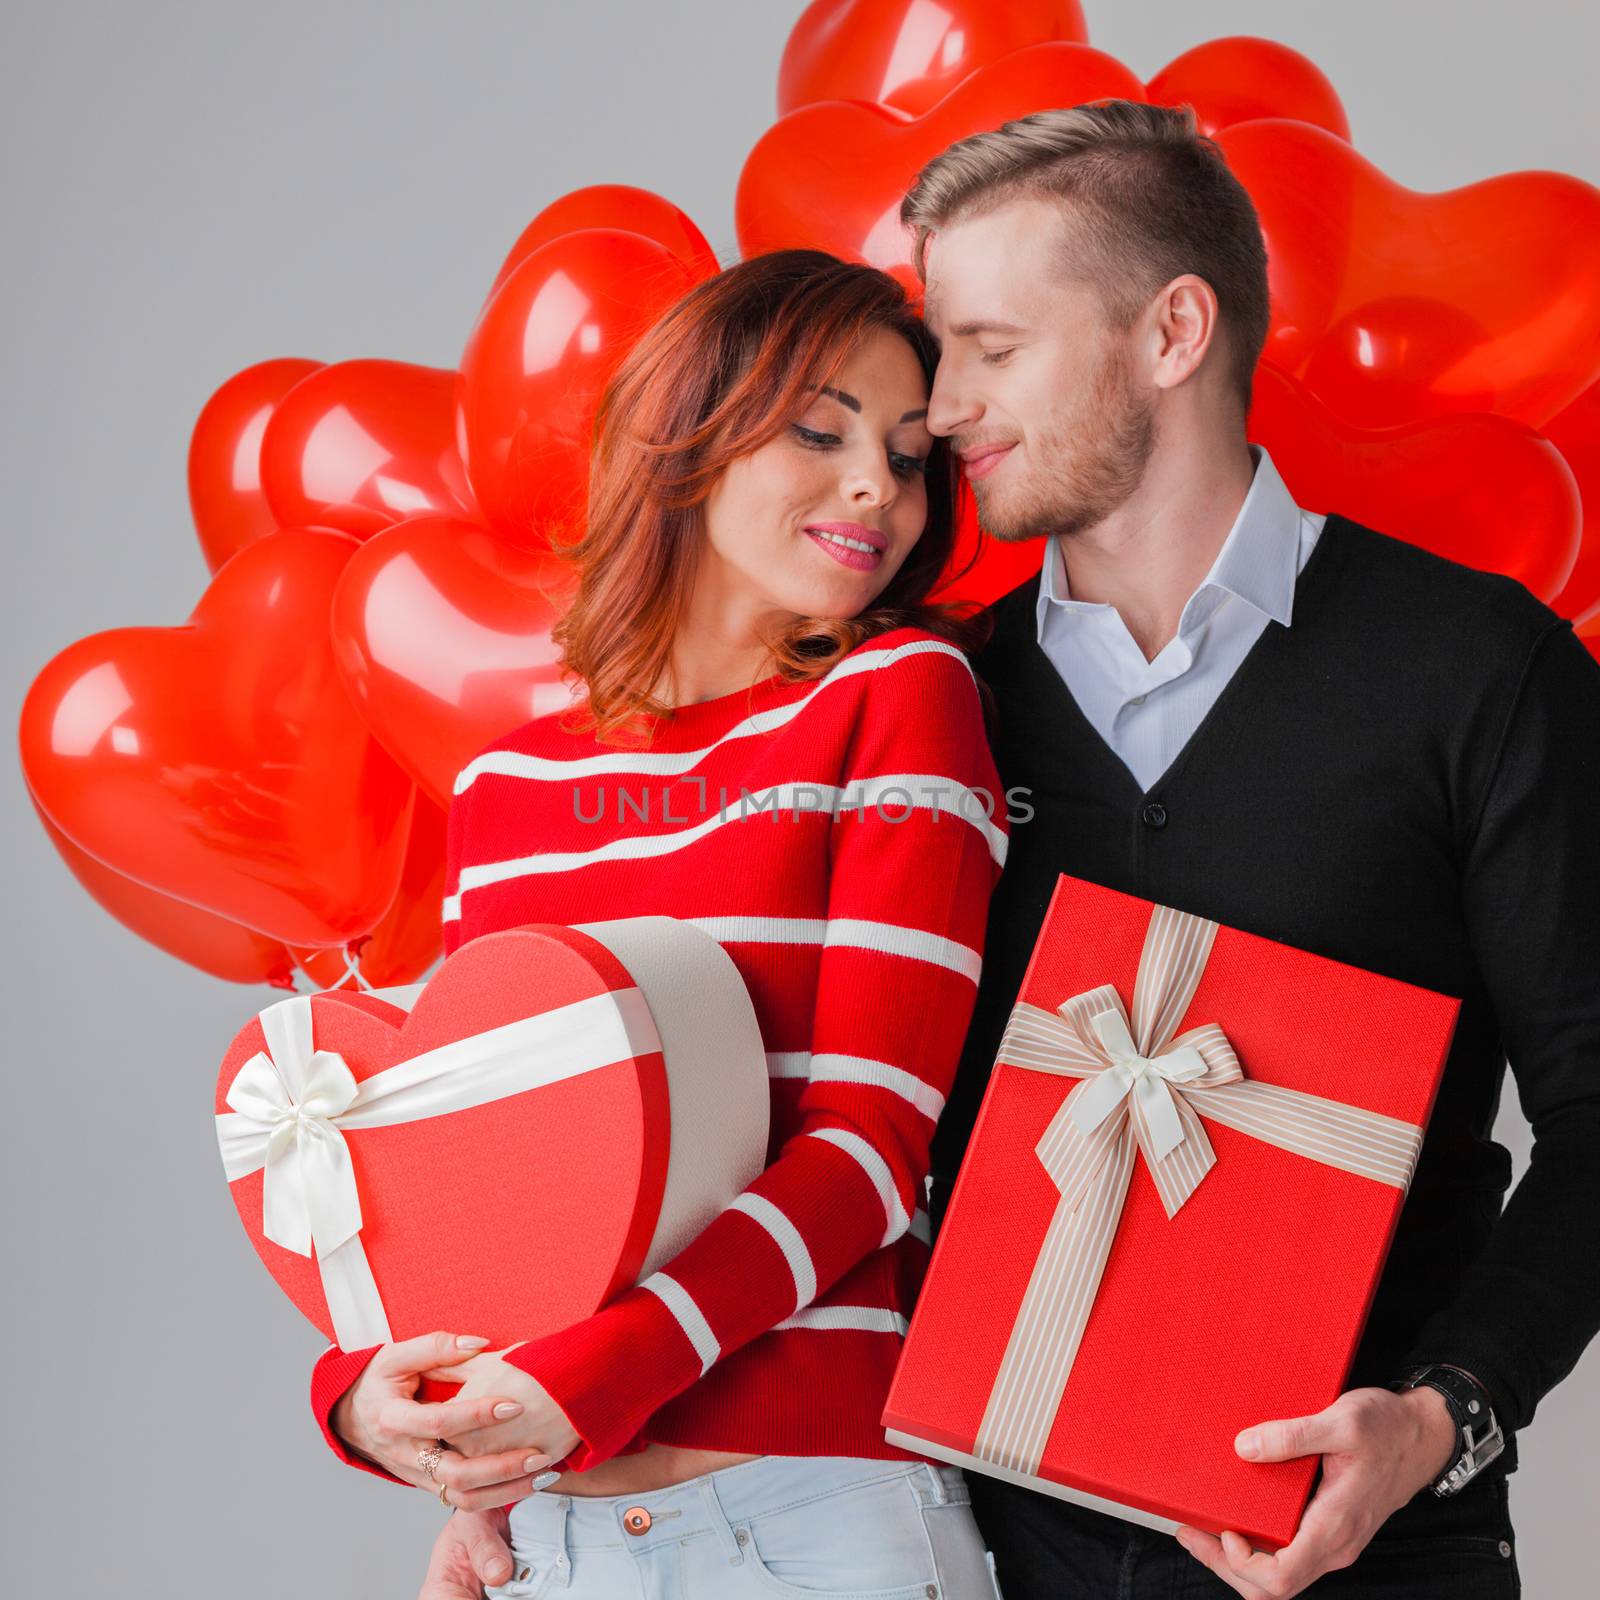 Happy embracing couple in love holding Valentines day gifts and bunch of heart shaped balloons